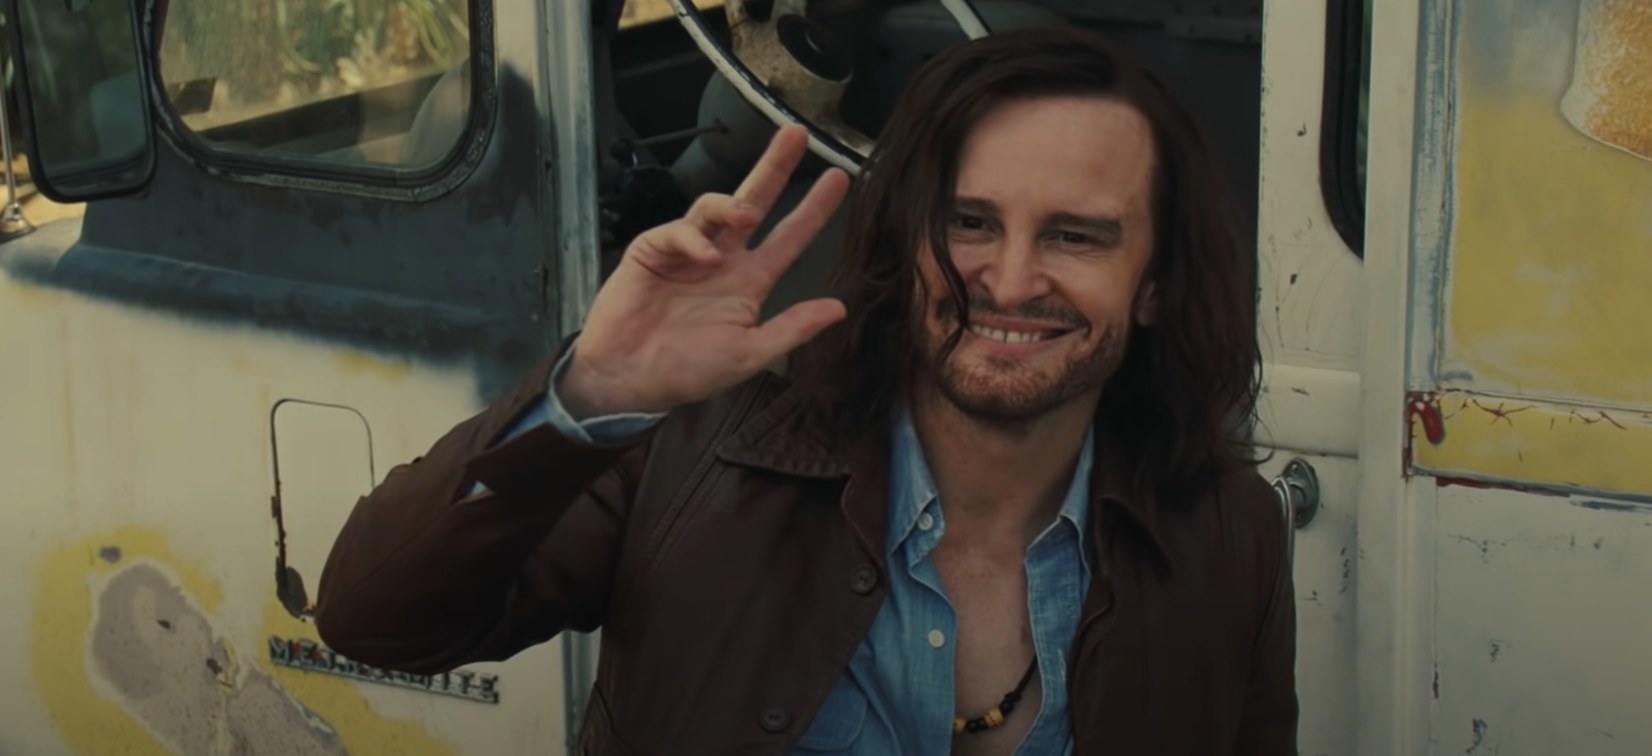 Damon Herriman as Charles Manson character in Once Upon a Time in Hollywood